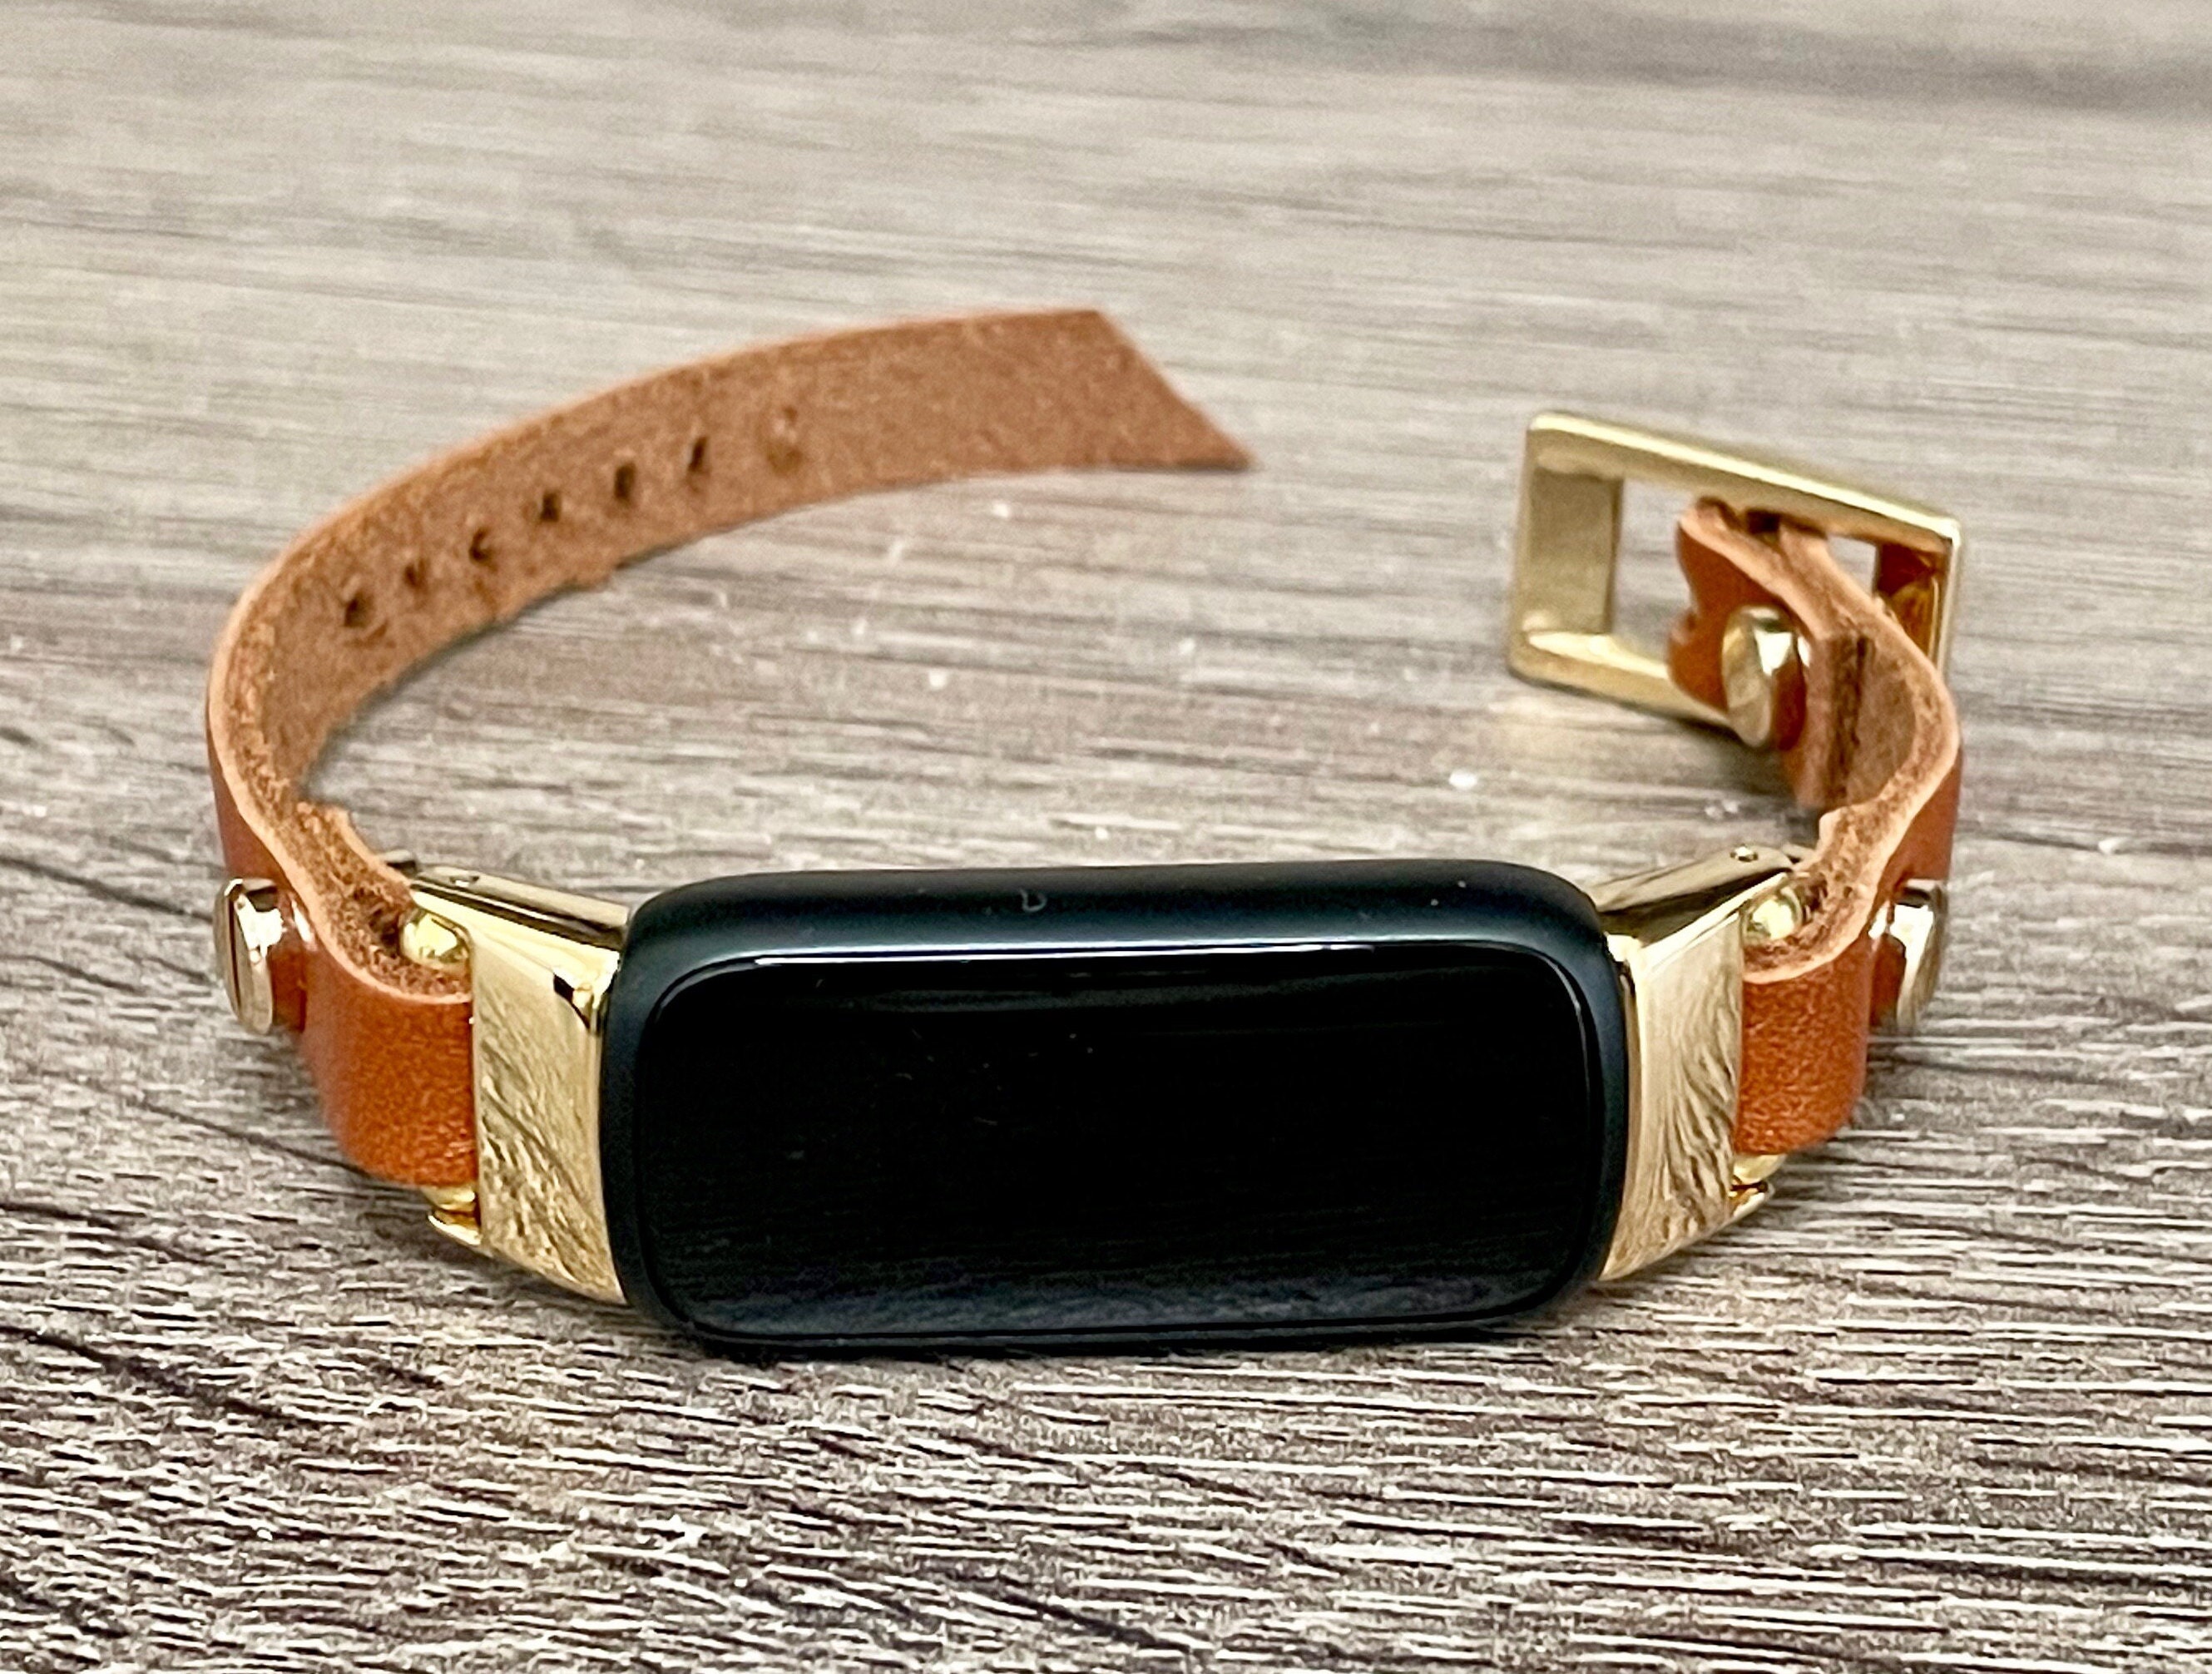 fitbit luxe band amazon